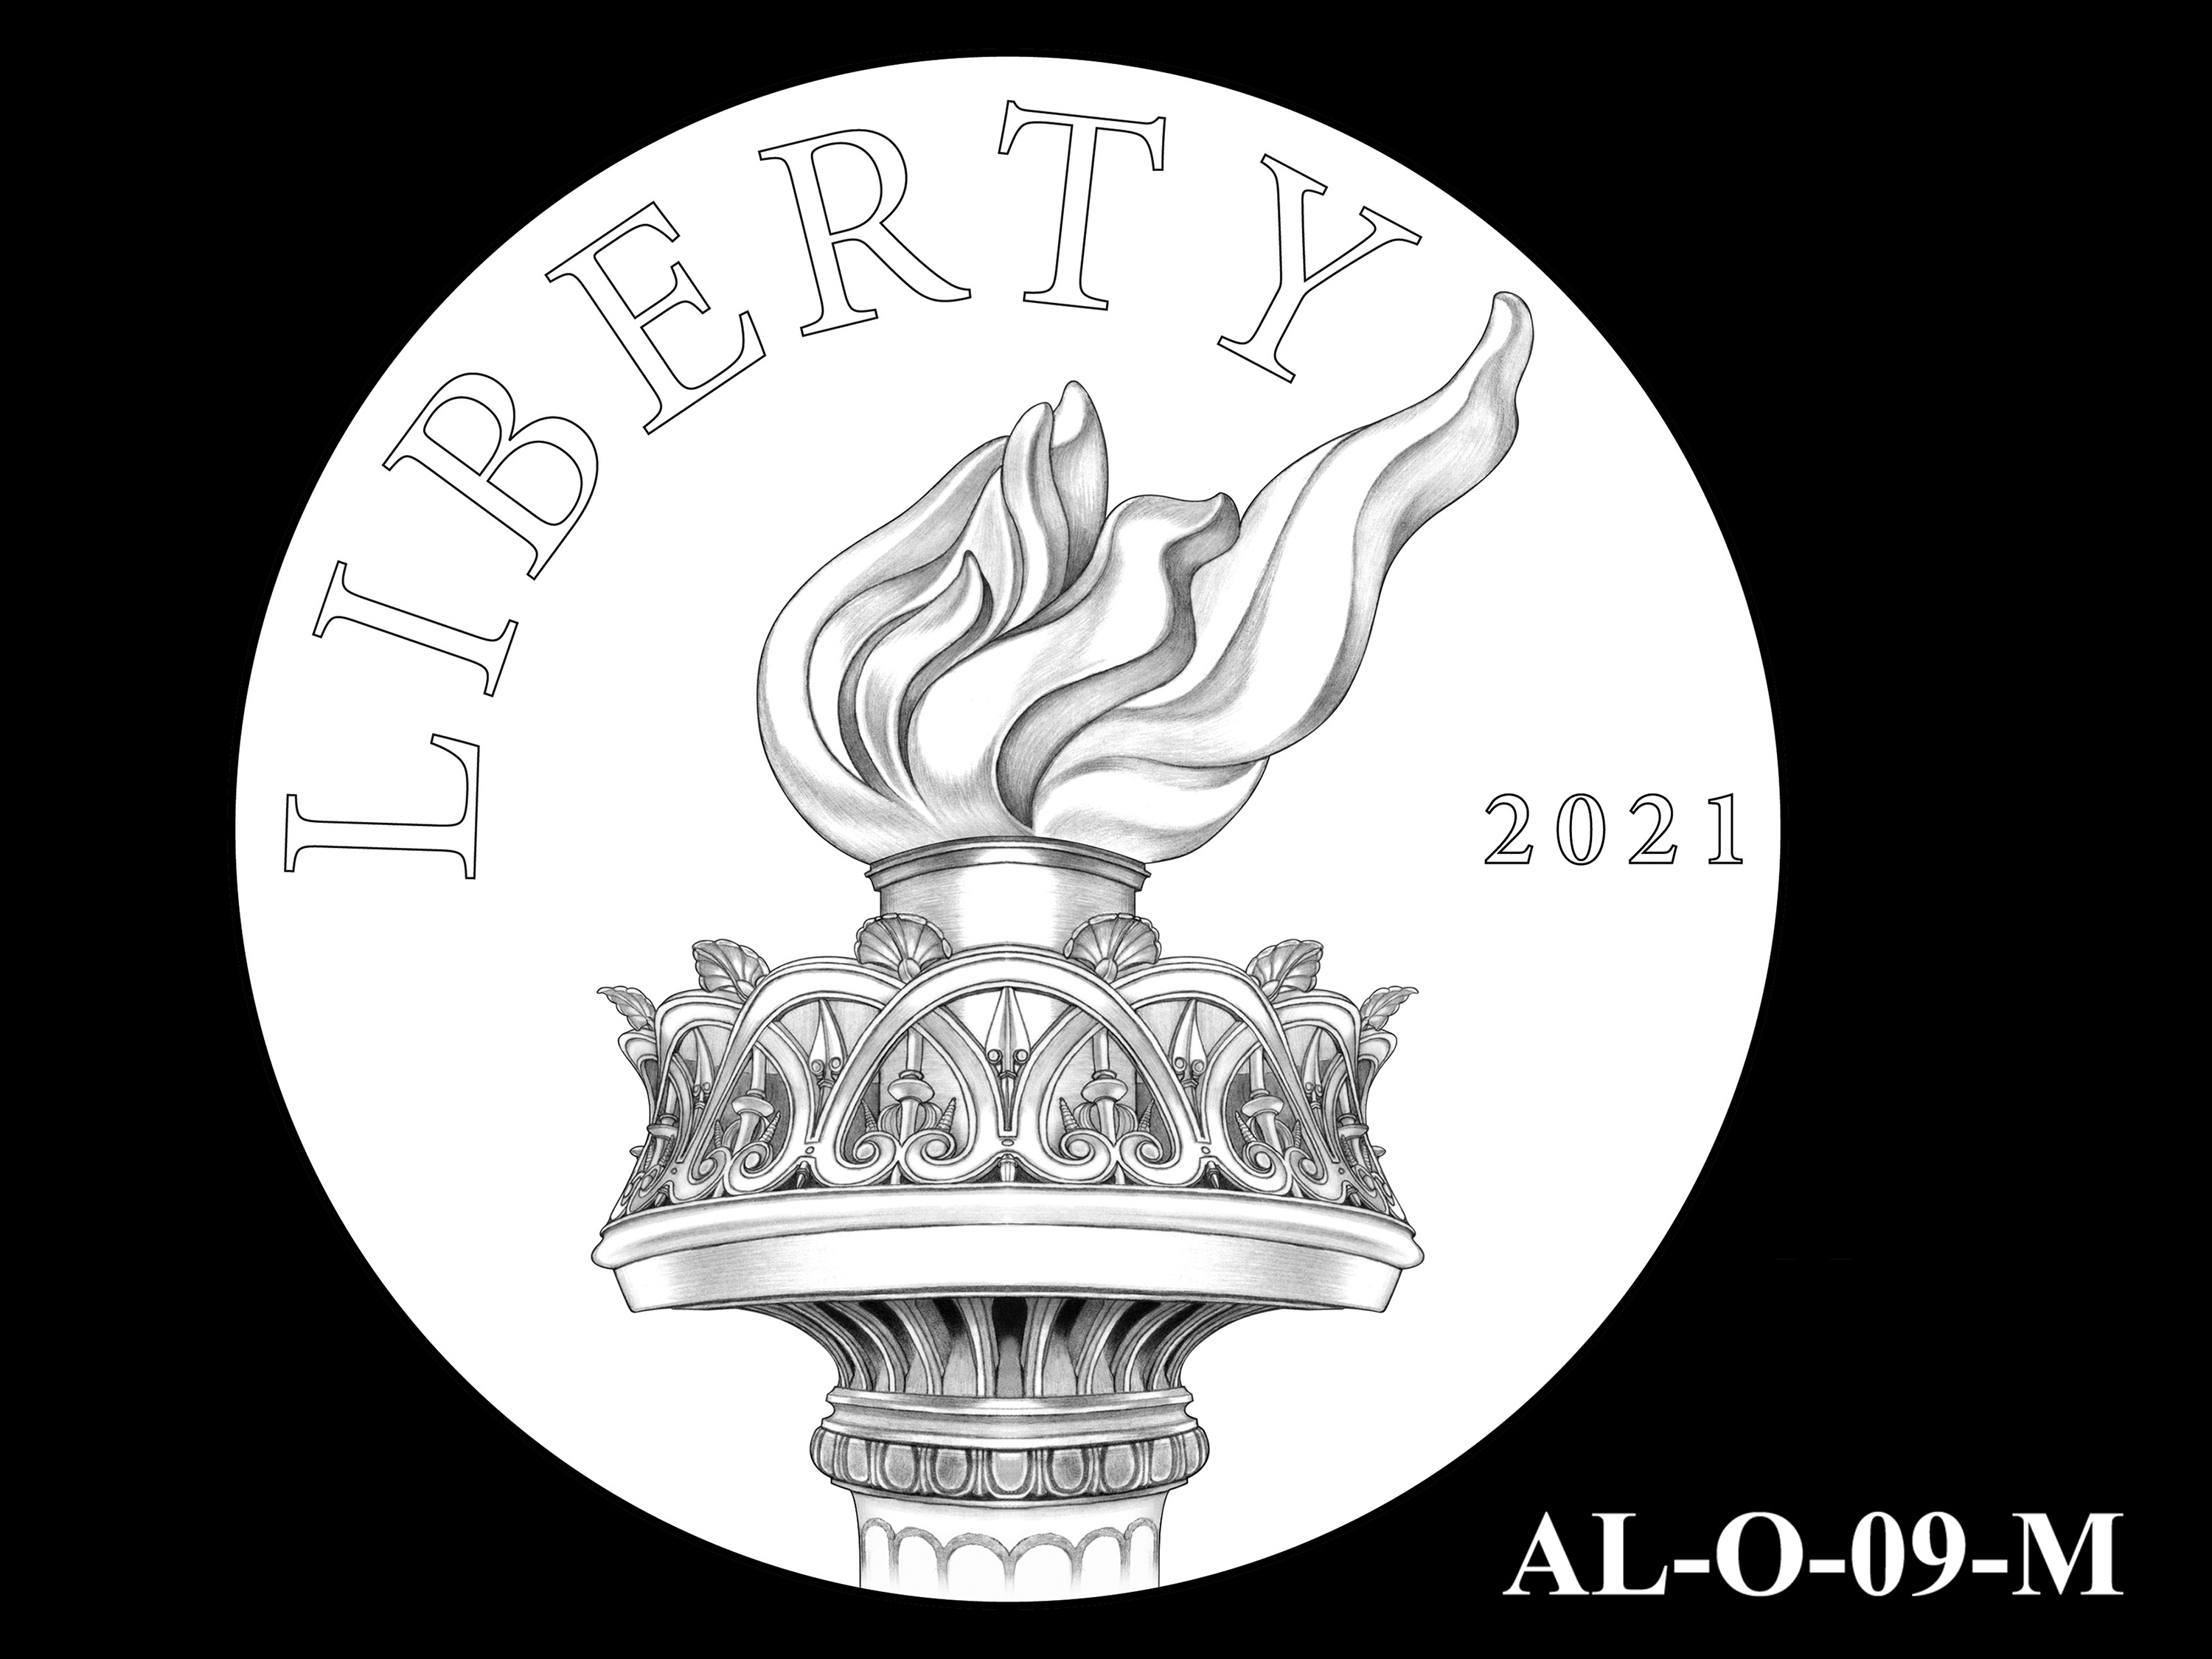 AL-O-09-M -- 2021 American Liberty Gold Coin and Silver Medal Program - Obverse